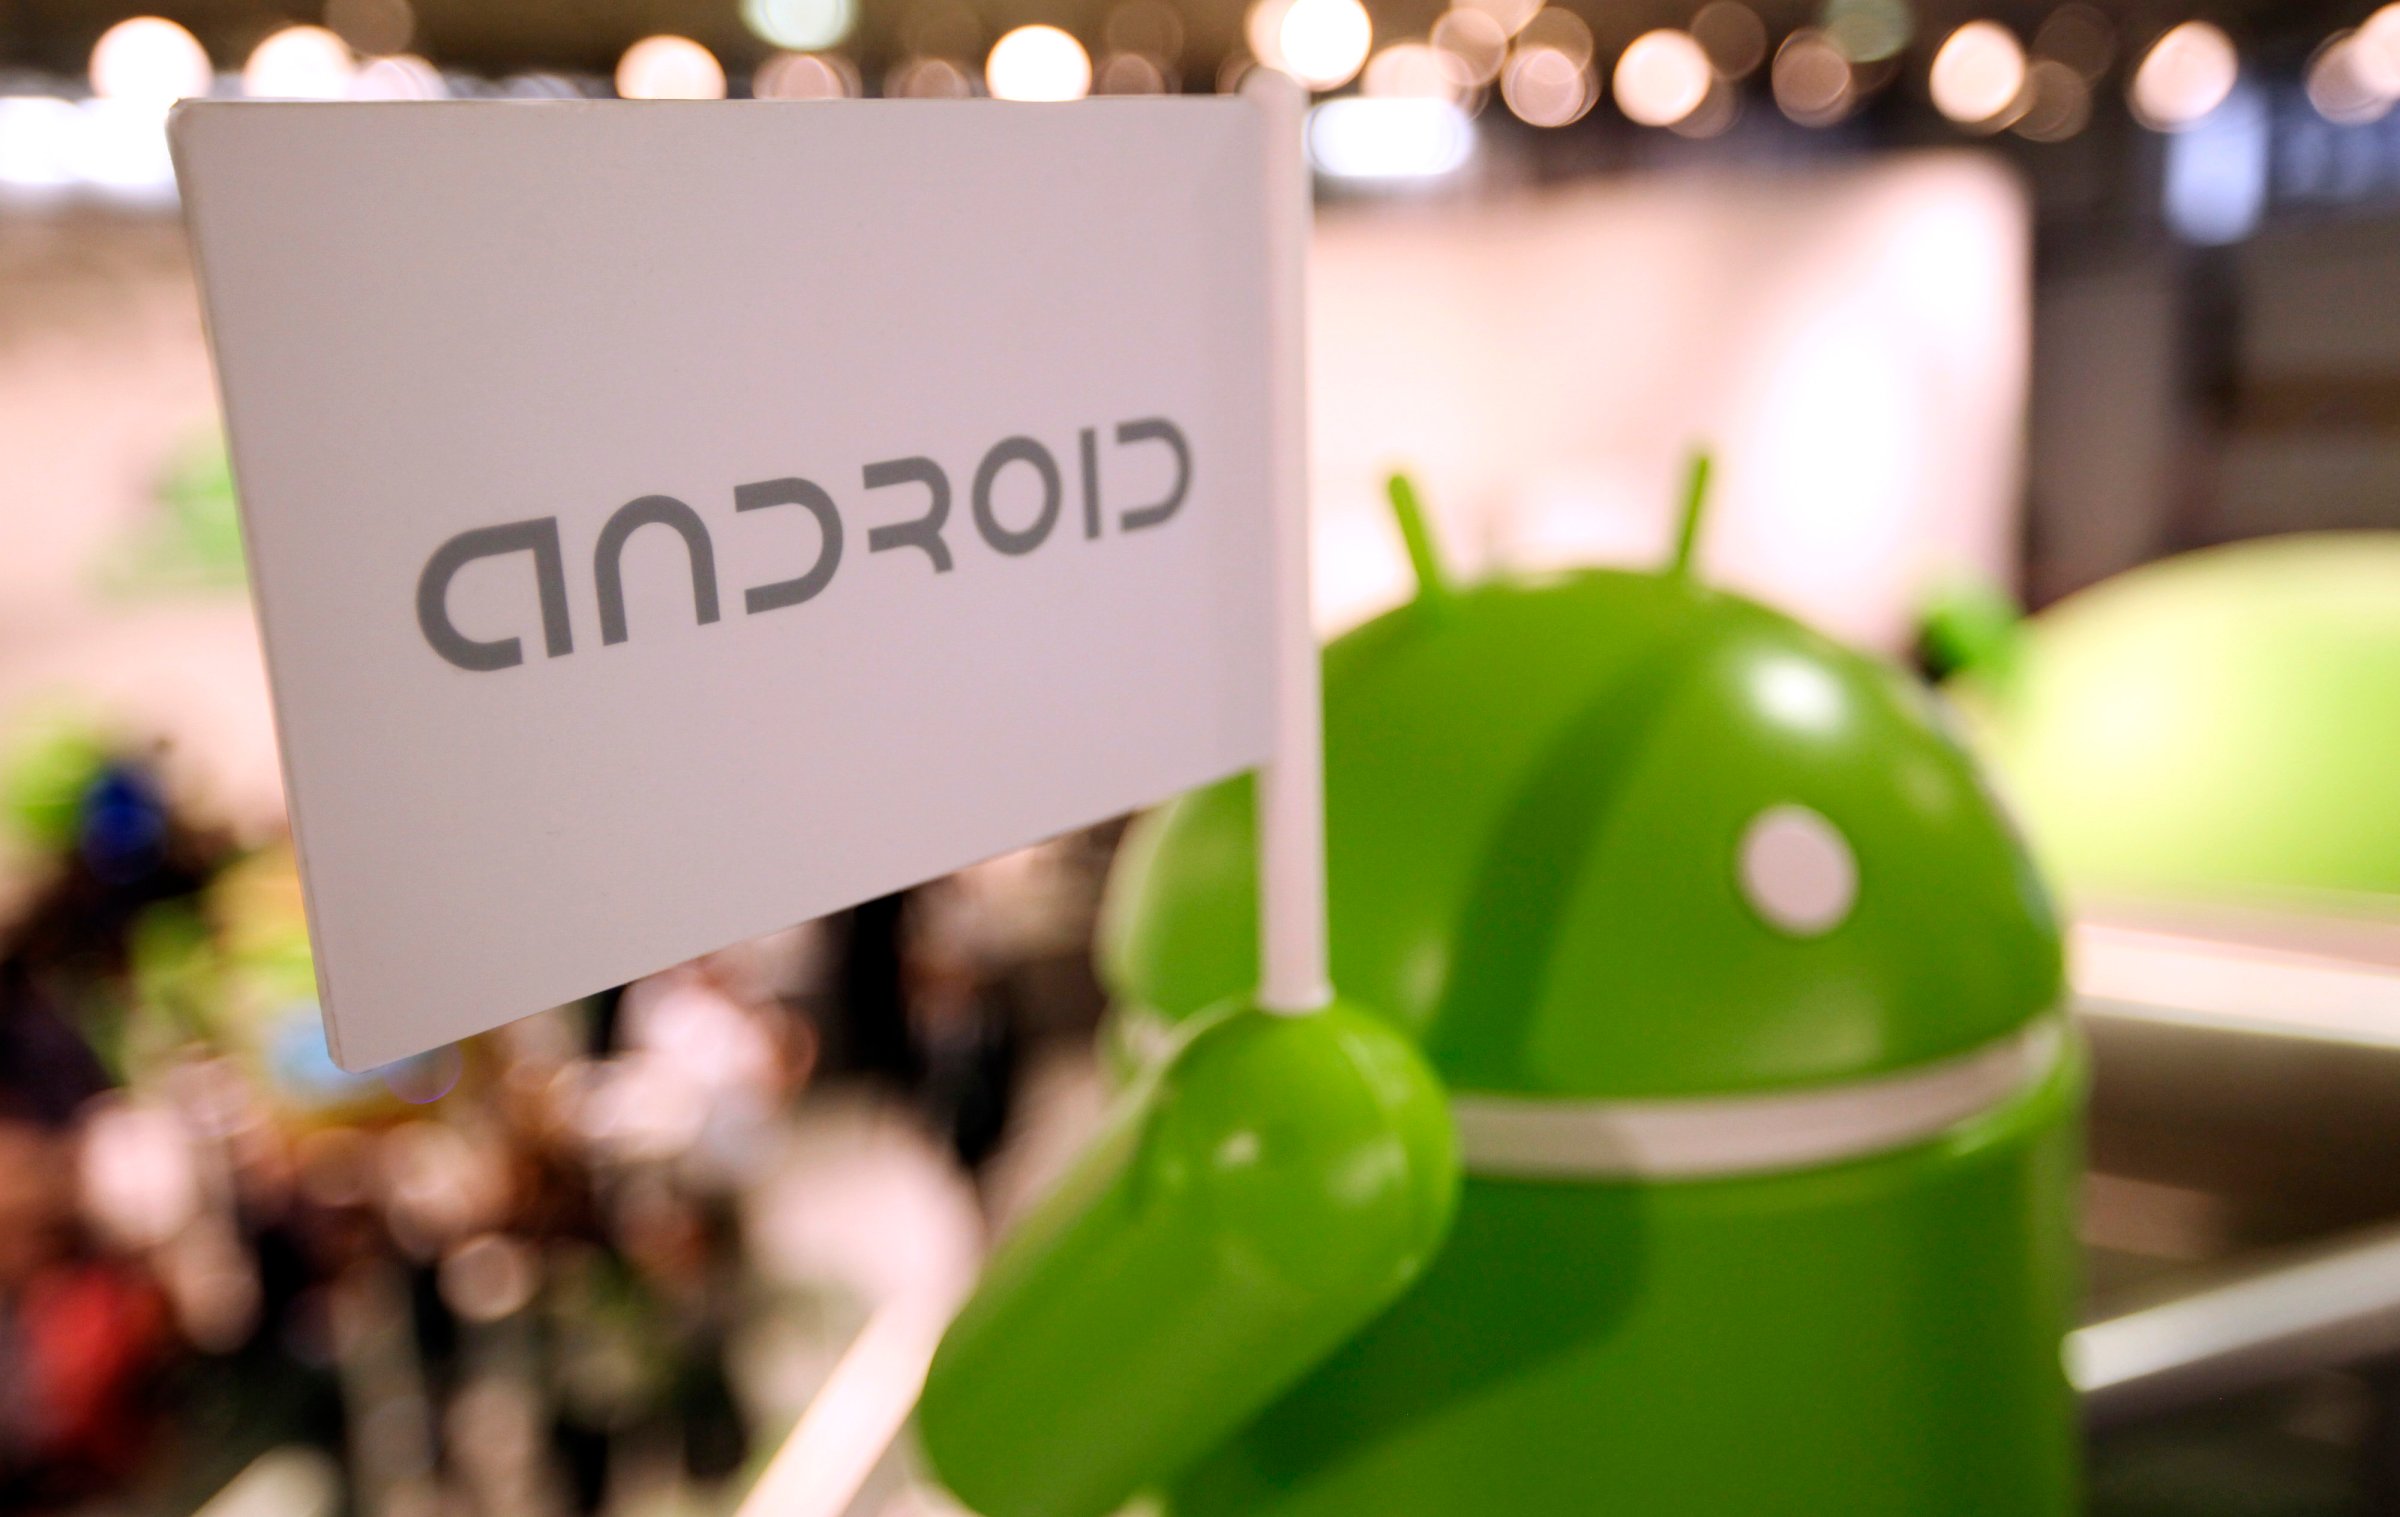 A model of the Android operating system logo at the Mobile World Congress in Barcelona, Spain, on Feb. 27, 2012.